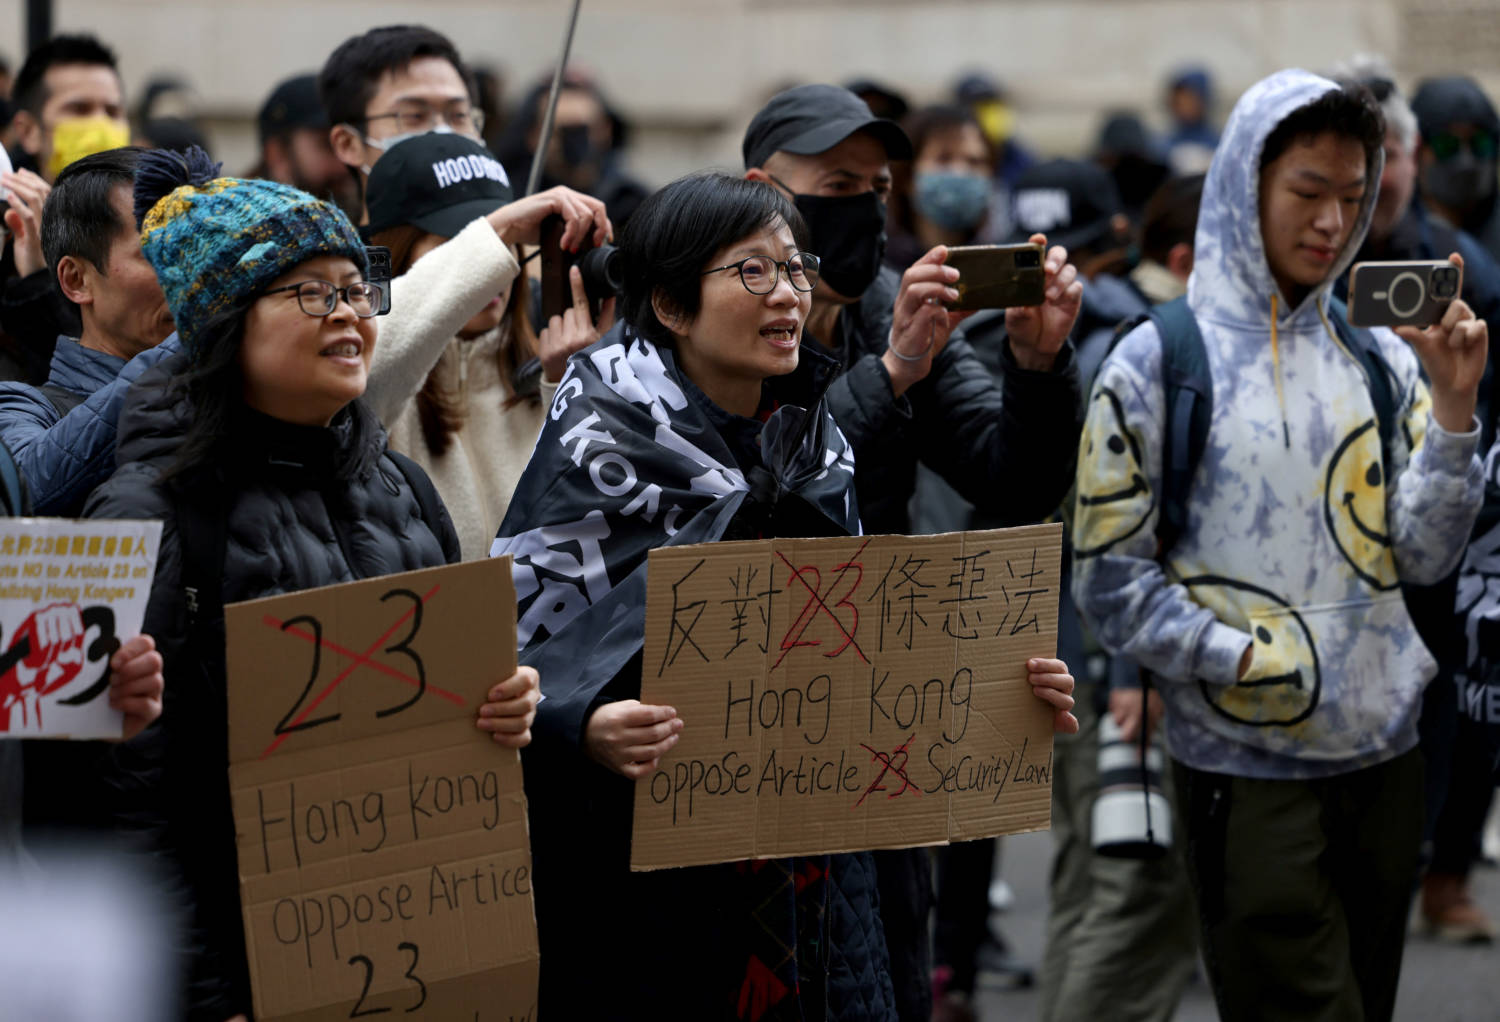 Protest In Solidarity With Hong Kong Residents In Relation To Article 23 Laws, In London